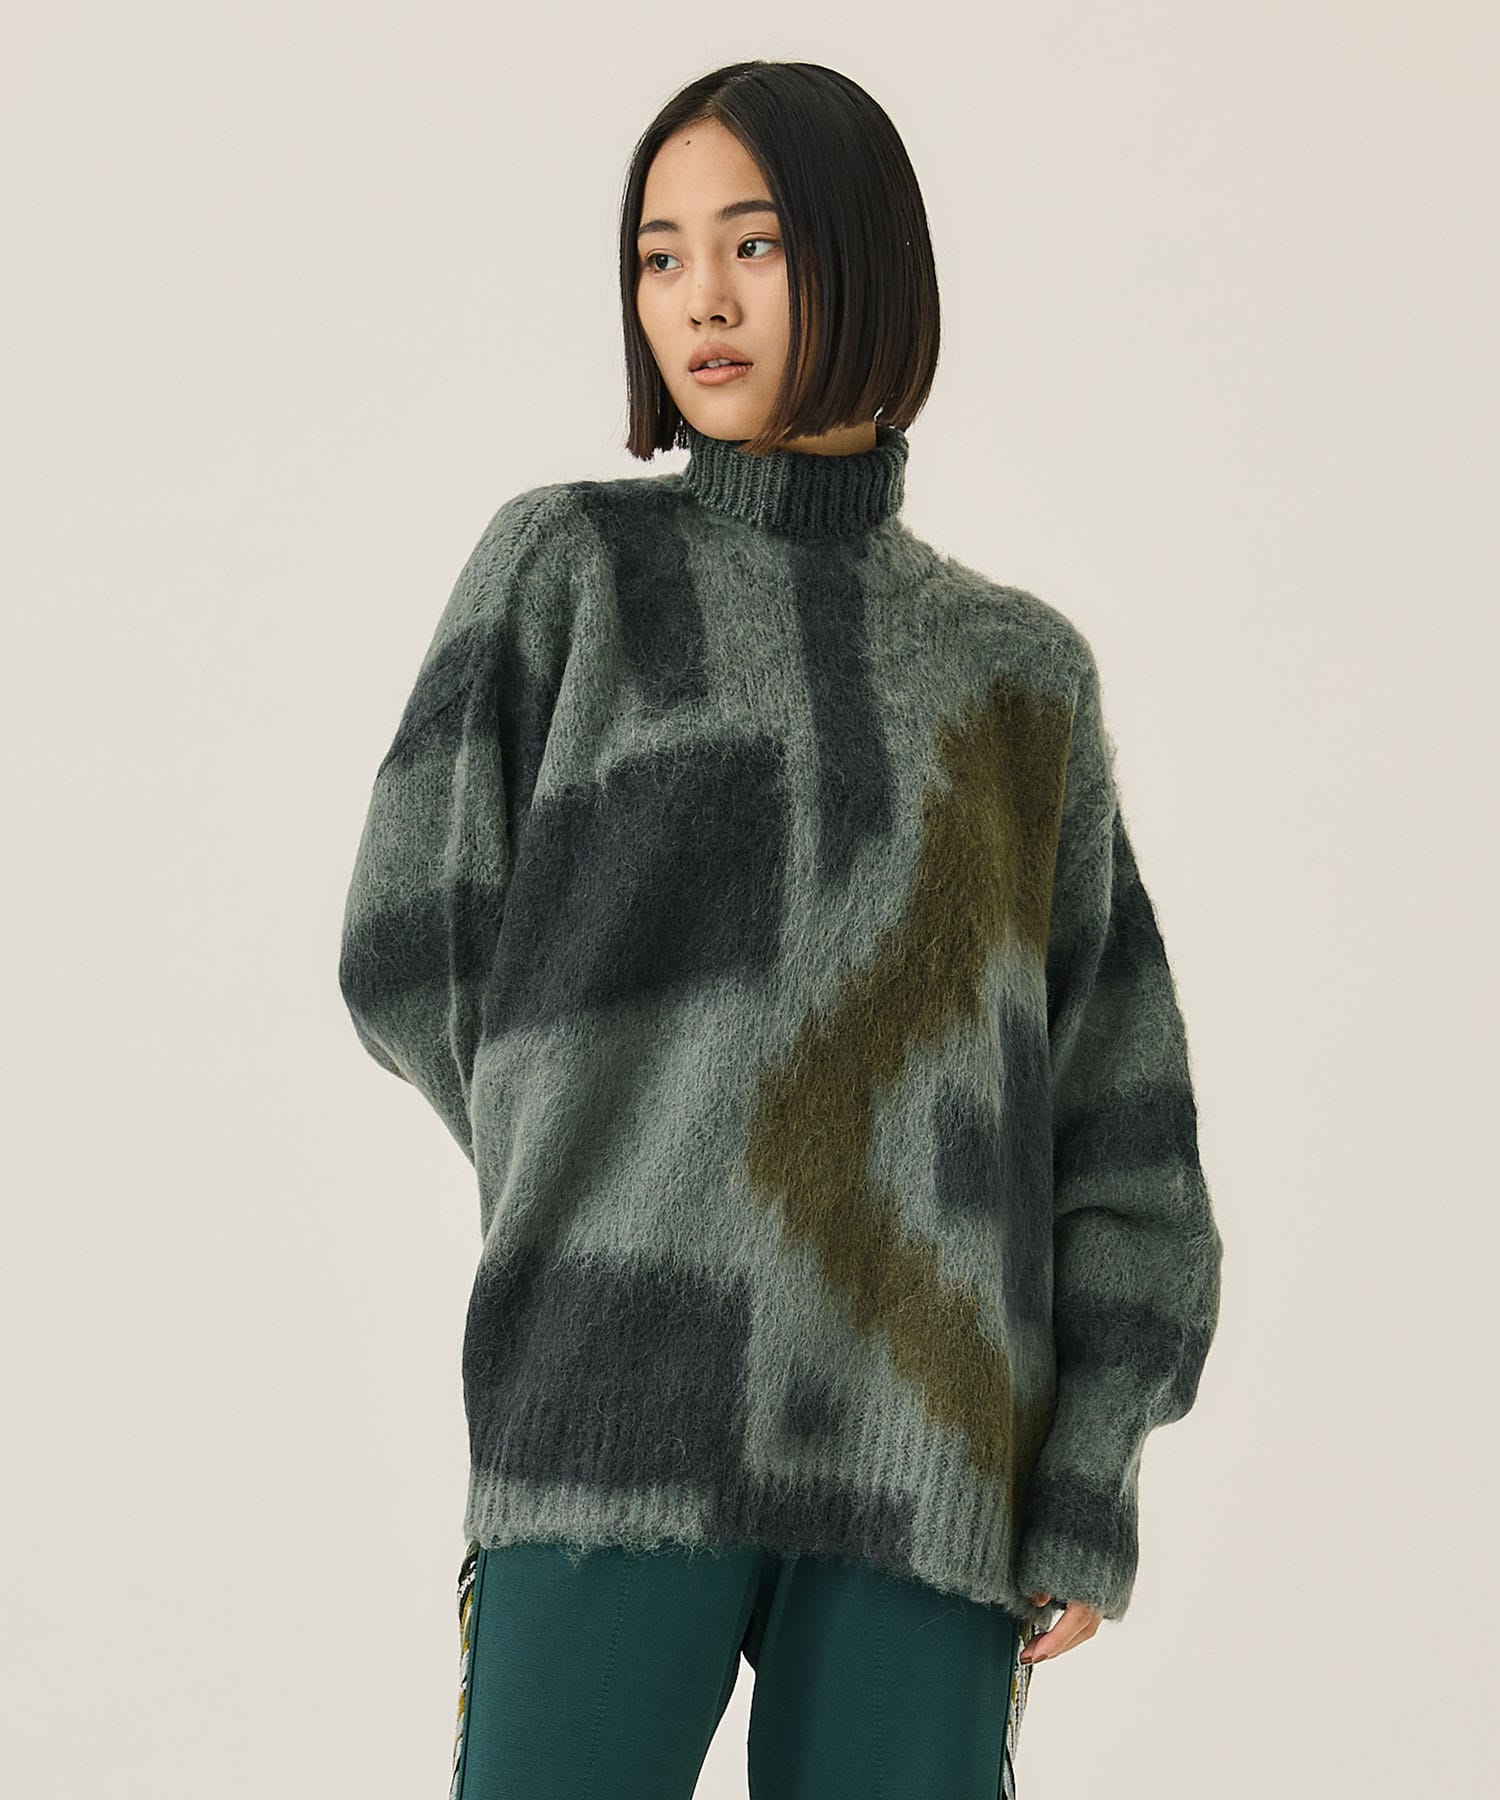 Origami Dyed Suri Alpaca Wool Knitted Pullover